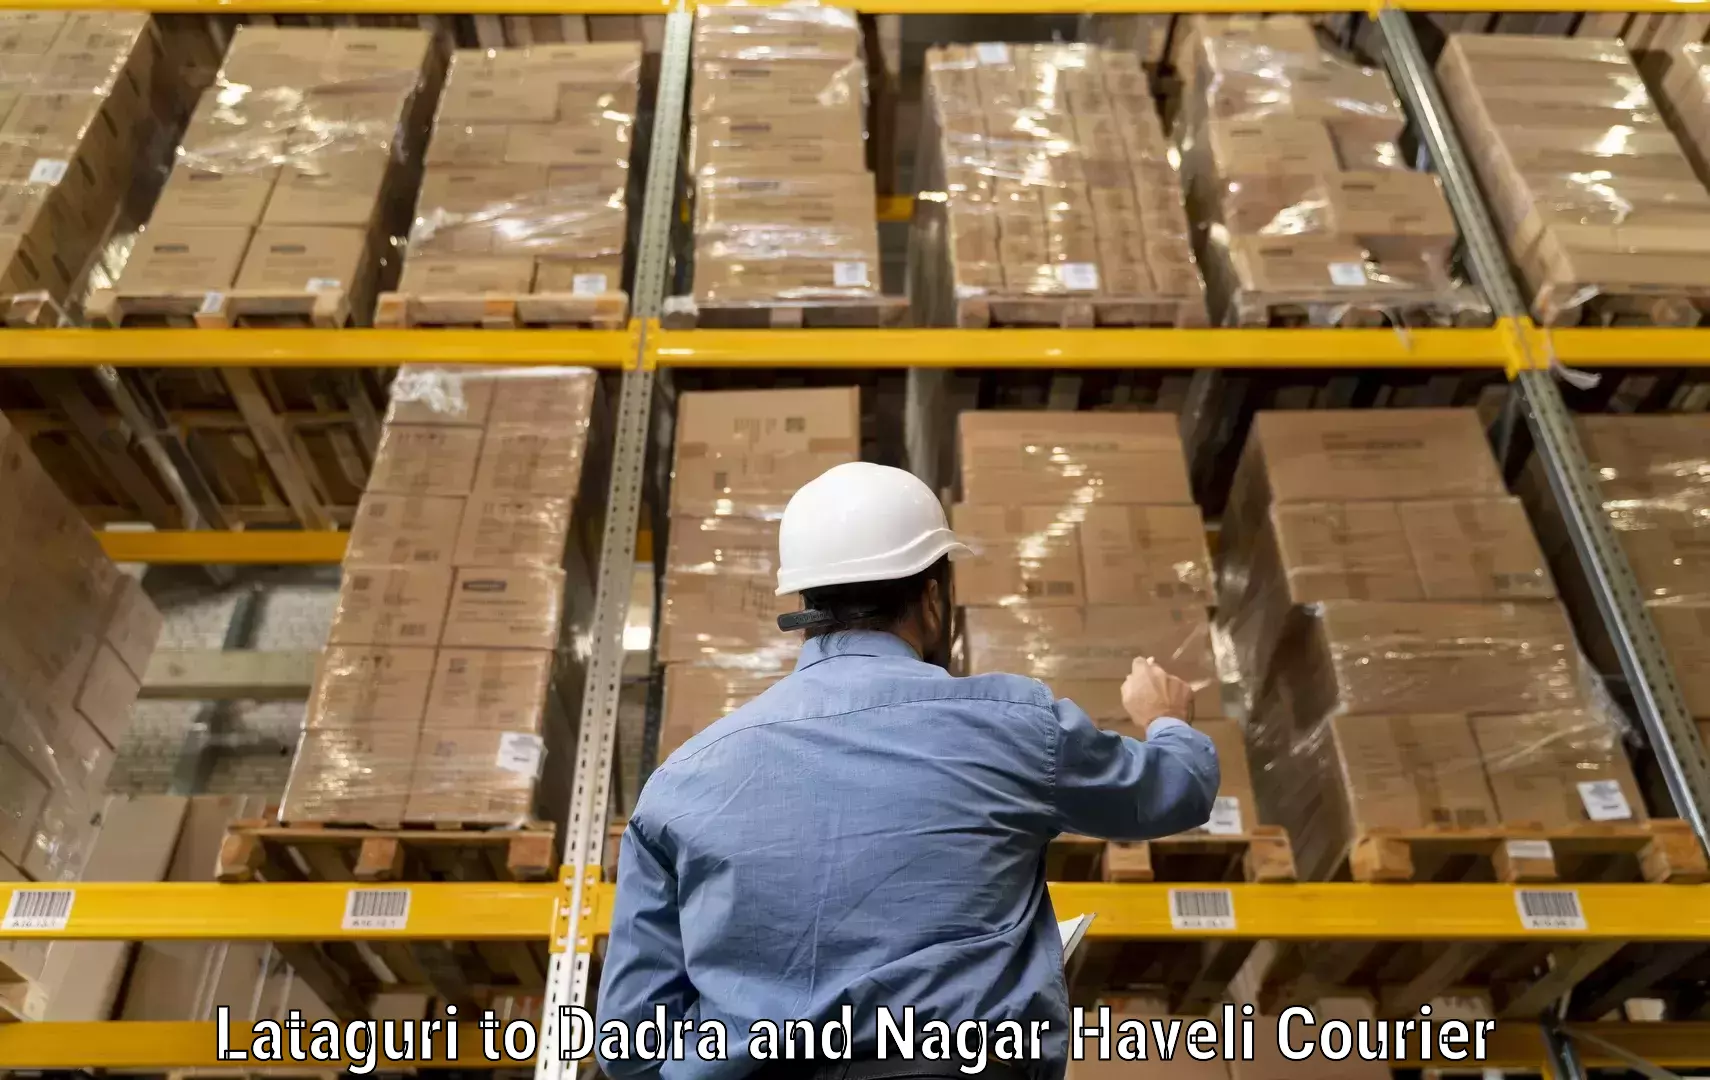 Flexible delivery schedules Lataguri to Dadra and Nagar Haveli